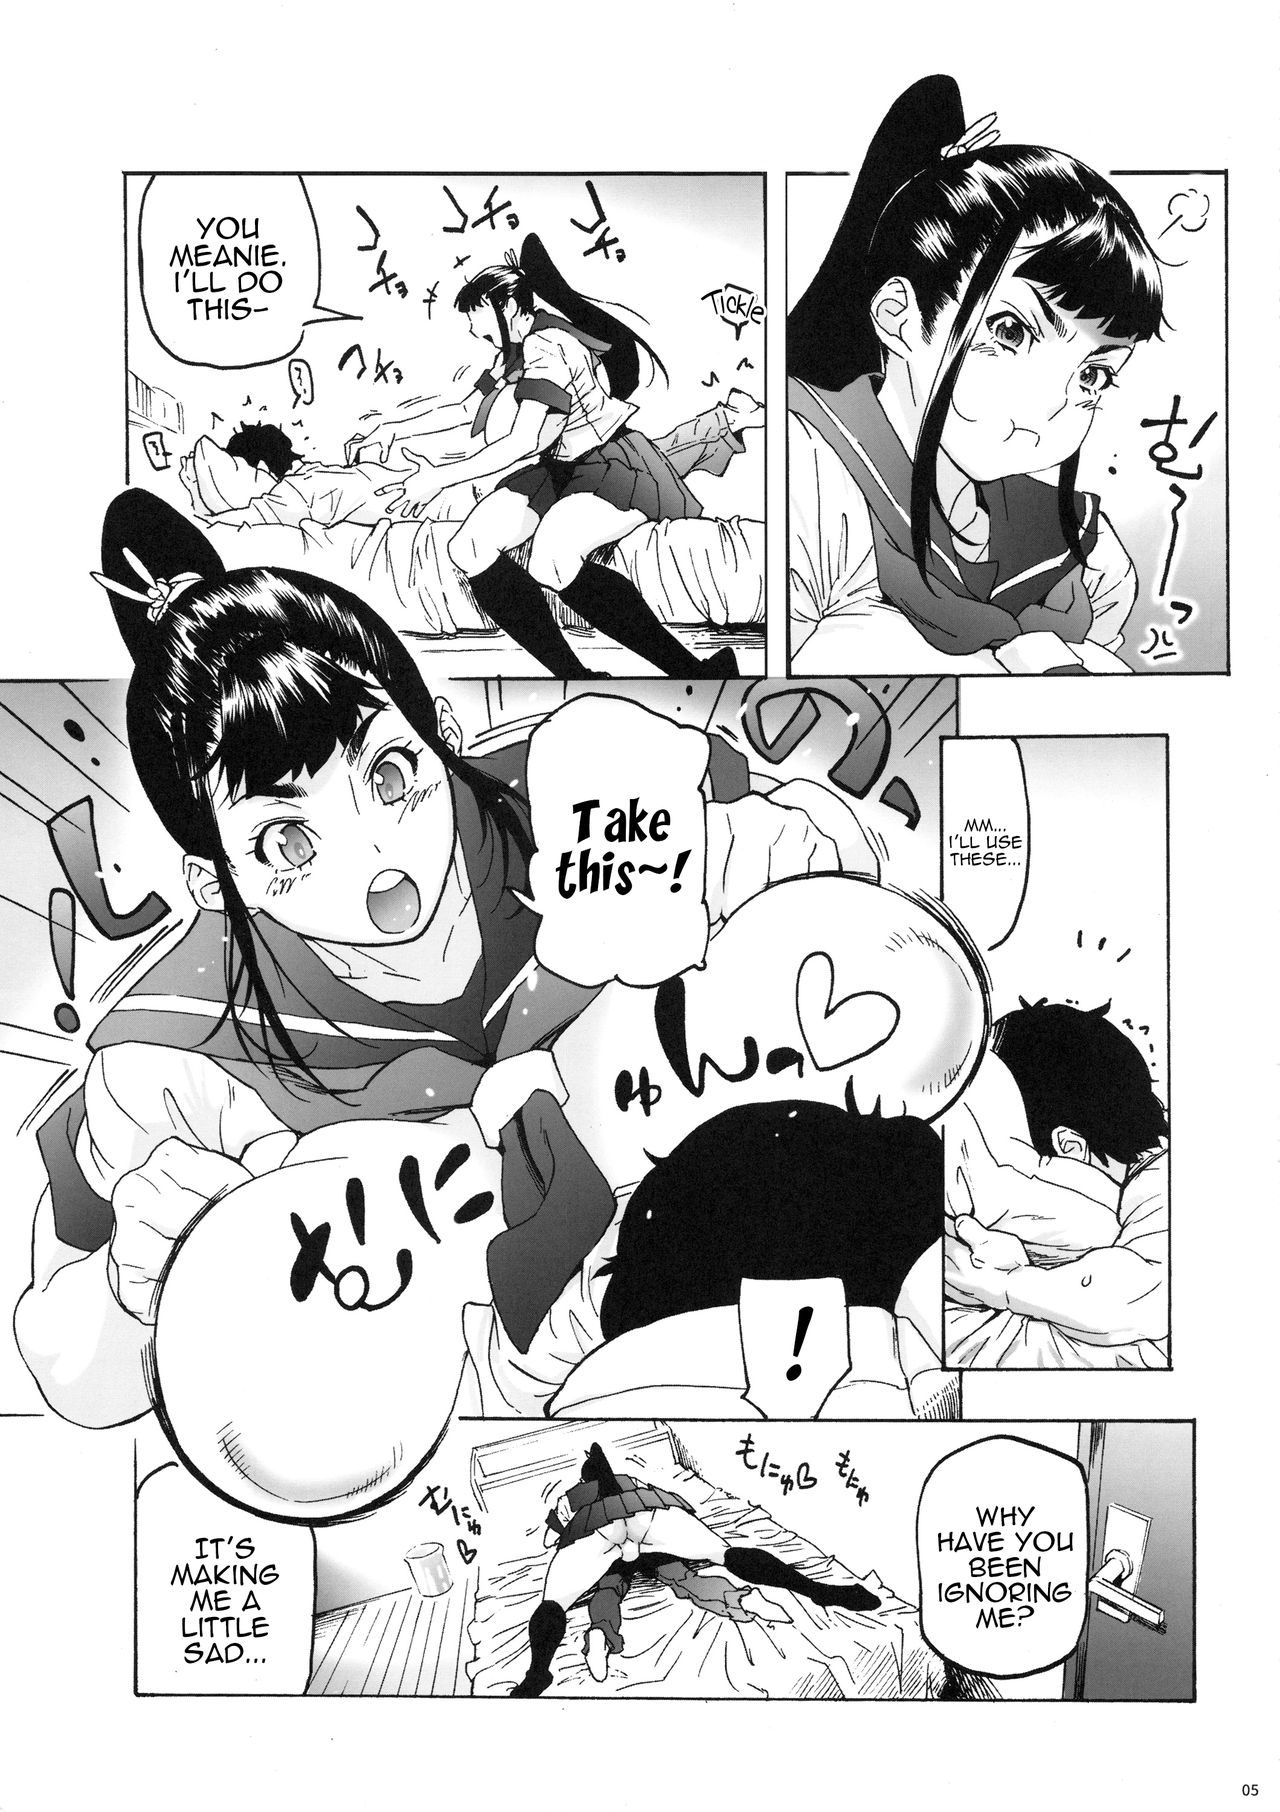 [Coochy-Coo (Bonten)] My Childhood friend is a JK Ponytailed Girl | With Aki-Nee 2 | AkiAss 3 | Trilogy [English] {Stopittarpit} page 28 full